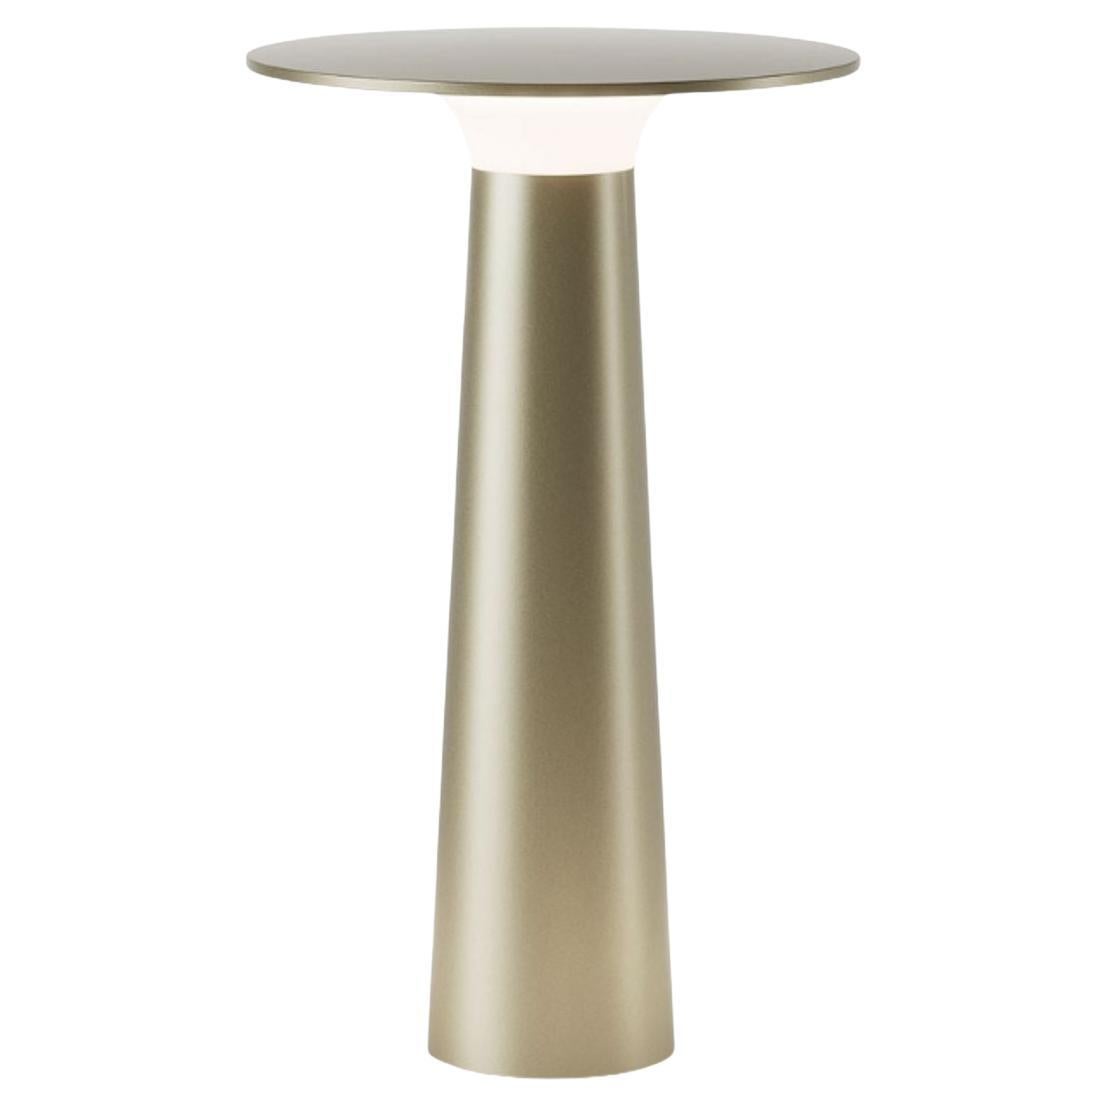 Klaus Nolting 'Lix' Portable Outdoor Aluminum Table Lamp in White for IP44de In New Condition For Sale In Glendale, CA